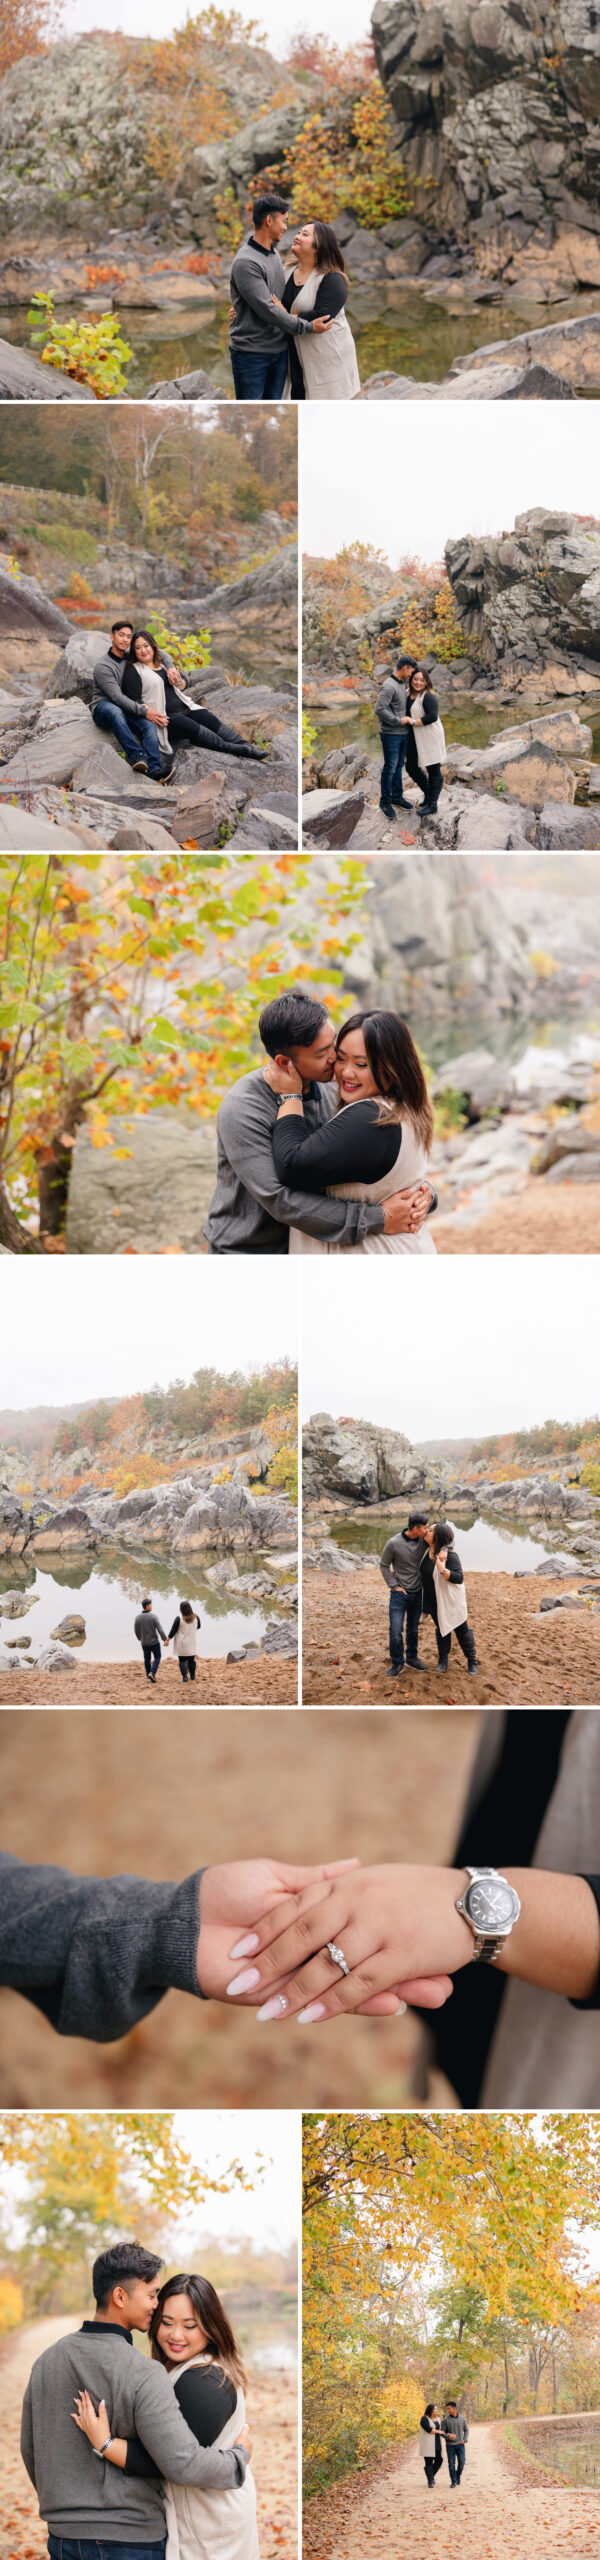 Casual fall engagement photos of cambodian-american couple in maryland